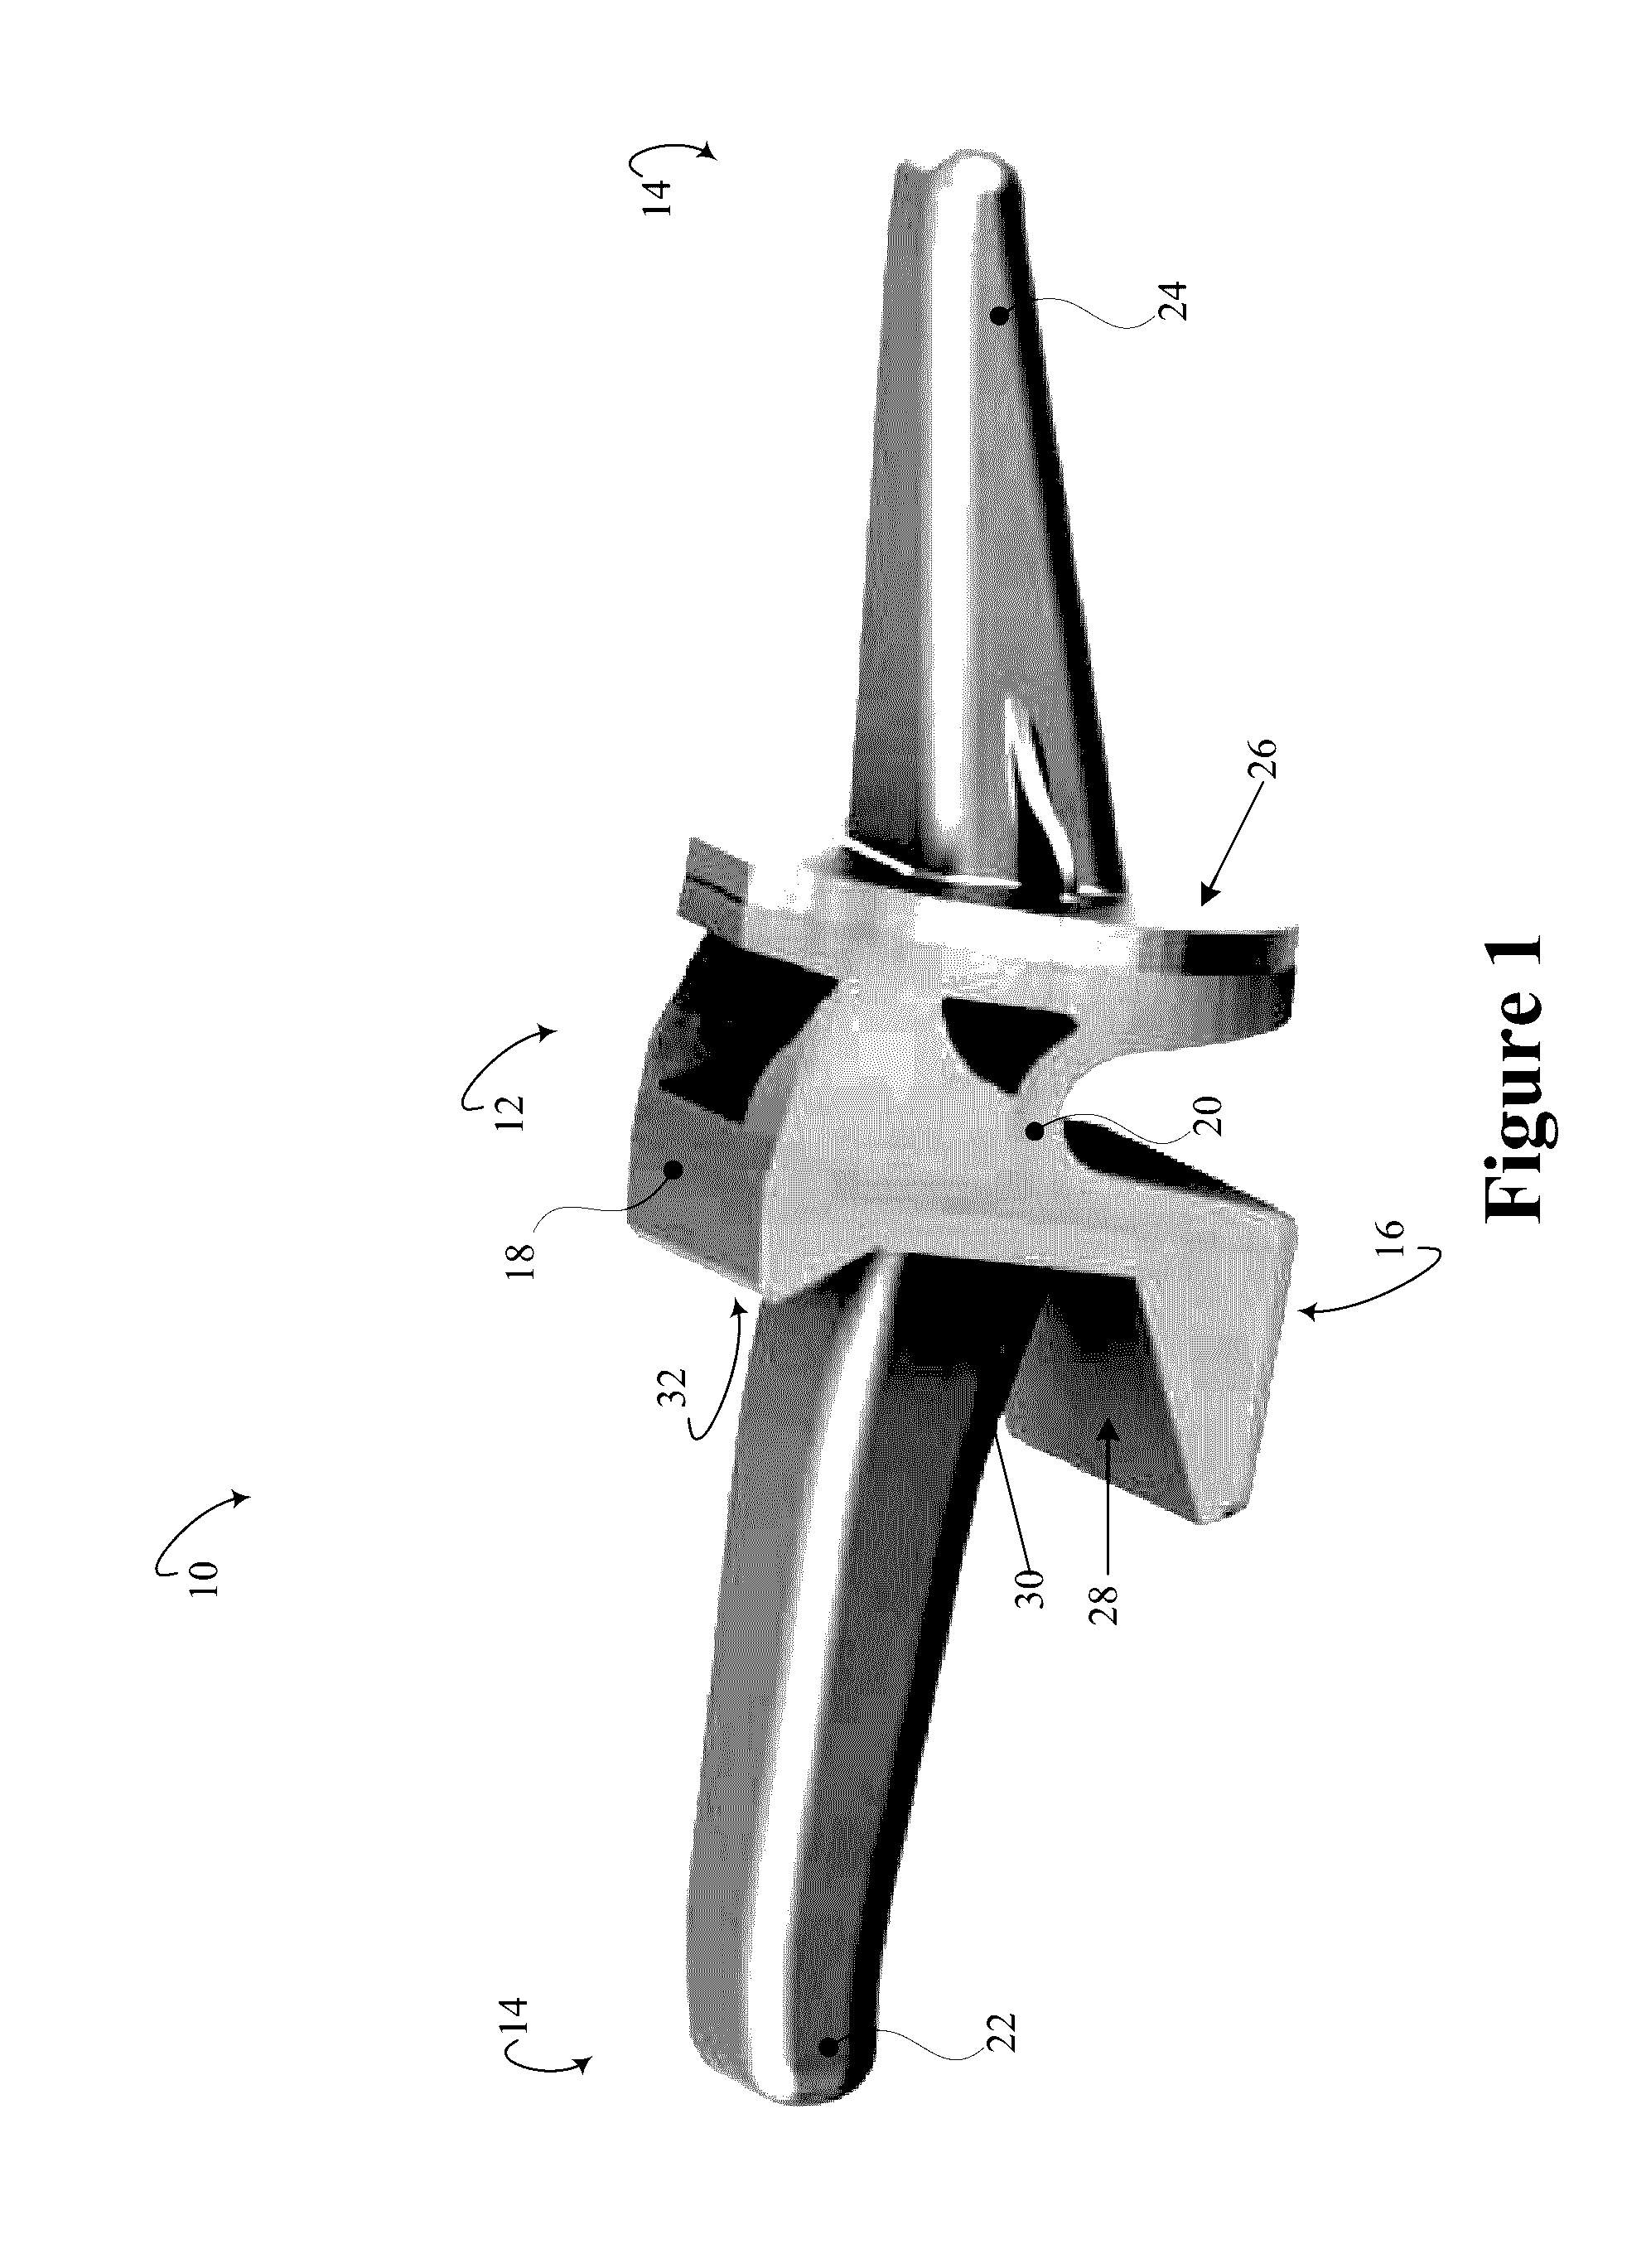 Proximal interphalangeal joint prothesis